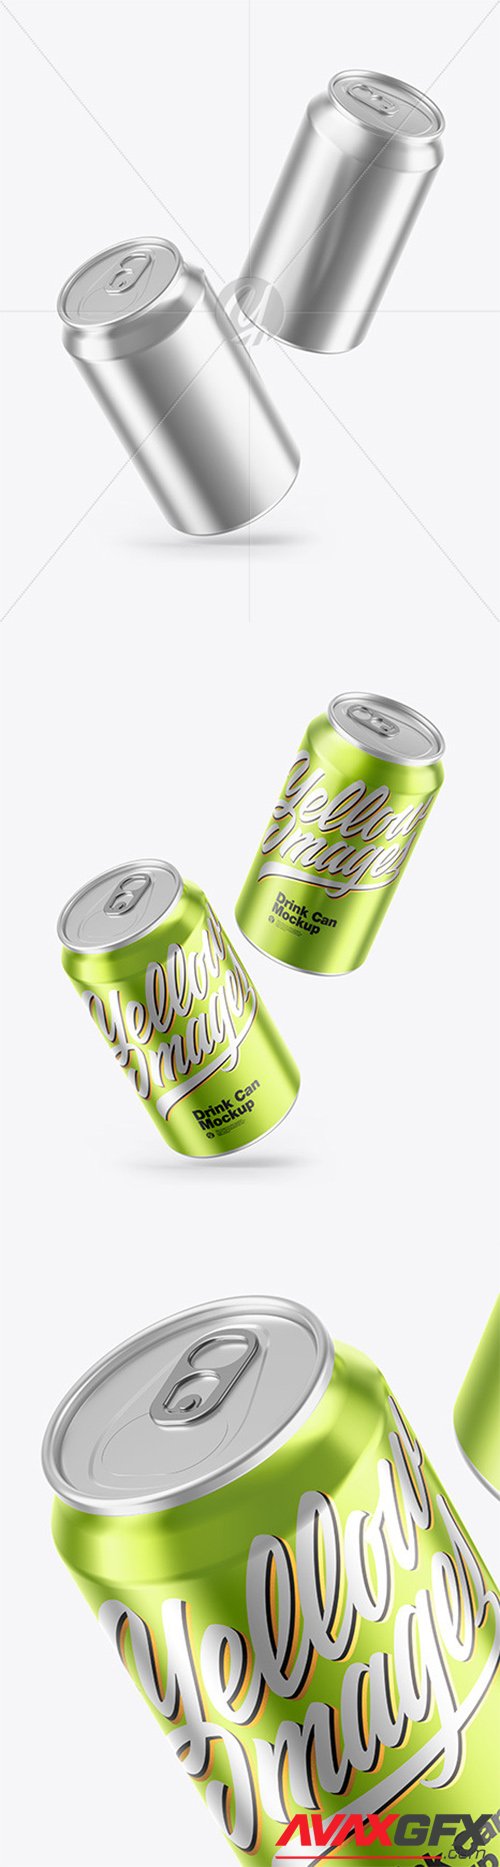 Download Metallic Drink Can With Glossy Finish And Condensation Png